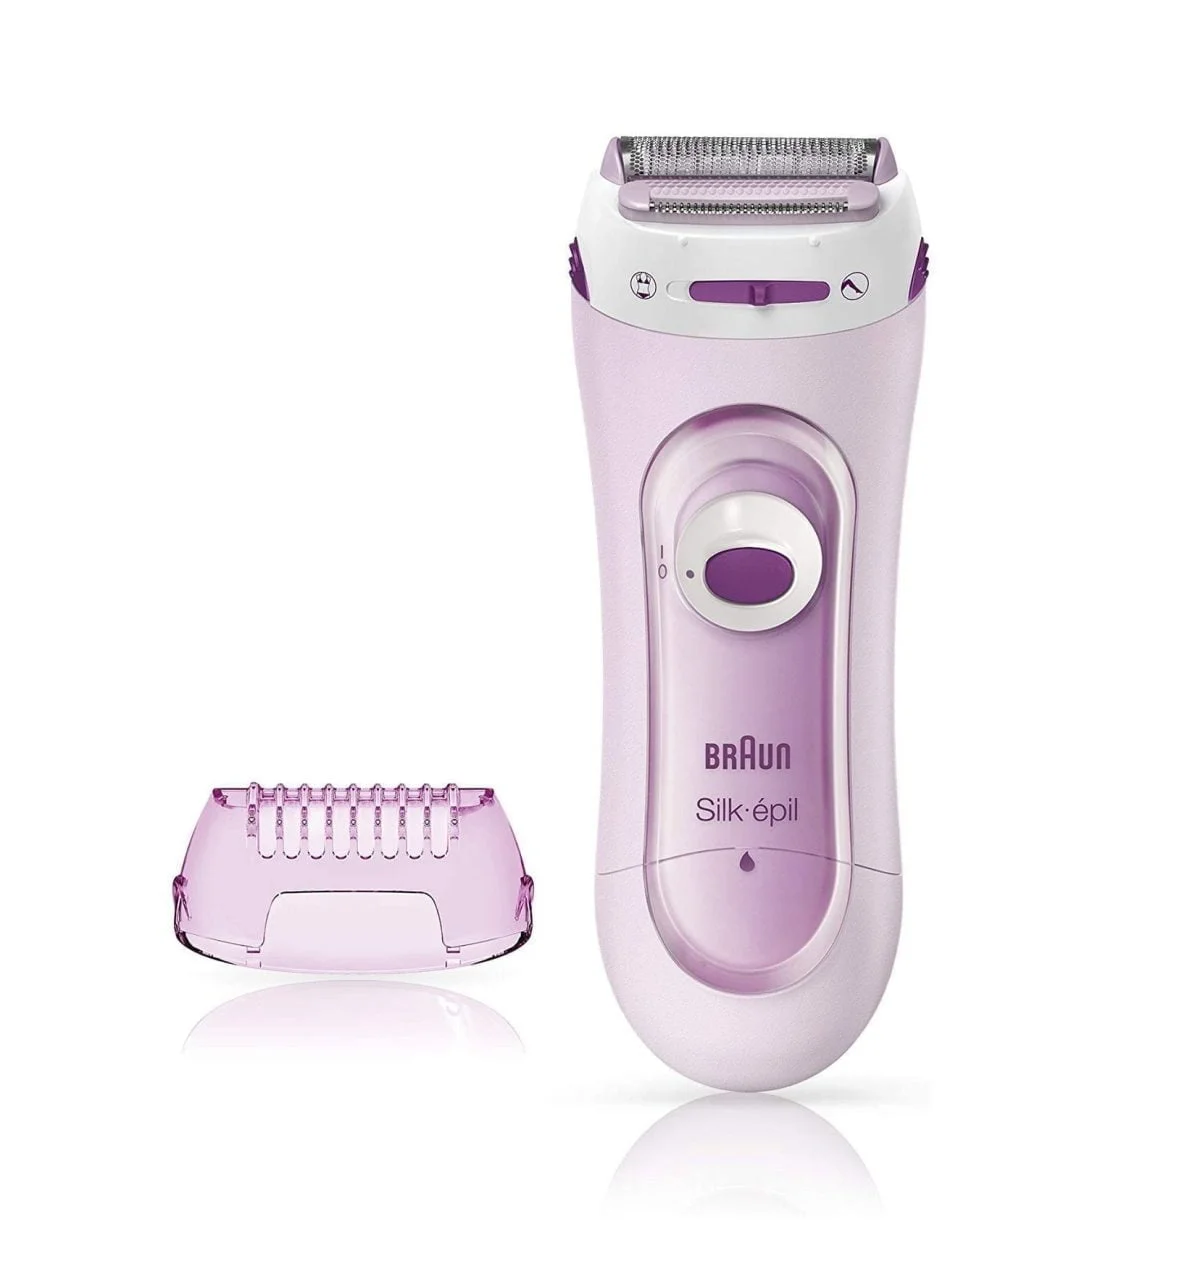 61Gw5Hkvs6L. Ac Sl1500 Braun &Amp;Lt;H1&Amp;Gt;Braun Silk-Épil Lady Shaver 5-103 - Cordless Electric Shaver And Trimmer System&Amp;Lt;/H1&Amp;Gt; Https://Www.youtube.com/Watch?V=2Fxya7Wkq6O &Amp;Lt;Ul Class=&Amp;Quot;A-Unordered-List A-Vertical A-Spacing-Mini&Amp;Quot;&Amp;Gt; &Amp;Lt;Li&Amp;Gt;&Amp;Lt;Span Class=&Amp;Quot;A-List-Item&Amp;Quot;&Amp;Gt; Cordless Electric Lady Shaver &Amp;Lt;/Span&Amp;Gt;&Amp;Lt;/Li&Amp;Gt; &Amp;Lt;Li&Amp;Gt;&Amp;Lt;Span Class=&Amp;Quot;A-List-Item&Amp;Quot;&Amp;Gt; Floating Foil And Trimmer For A Close Shave On Legs, Underarms Or Bikini Line &Amp;Lt;/Span&Amp;Gt;&Amp;Lt;/Li&Amp;Gt; &Amp;Lt;Li&Amp;Gt;&Amp;Lt;Span Class=&Amp;Quot;A-List-Item&Amp;Quot;&Amp;Gt; Rounded Head Adapts To Body Contours &Amp;Lt;/Span&Amp;Gt;&Amp;Lt;/Li&Amp;Gt; &Amp;Lt;Li&Amp;Gt;&Amp;Lt;Span Class=&Amp;Quot;A-List-Item&Amp;Quot;&Amp;Gt; 1 Extra: Trimmer Cap For Bikini Line And Sensitive Areas &Amp;Lt;/Span&Amp;Gt;&Amp;Lt;/Li&Amp;Gt; &Amp;Lt;Li&Amp;Gt;&Amp;Lt;Span Class=&Amp;Quot;A-List-Item&Amp;Quot;&Amp;Gt; 2Xaa Batteries Are Included &Amp;Lt;/Span&Amp;Gt;&Amp;Lt;/Li&Amp;Gt; &Amp;Lt;/Ul&Amp;Gt; Lady Shaver Braun Silk-Épil Lady Shaver - Ls 5100